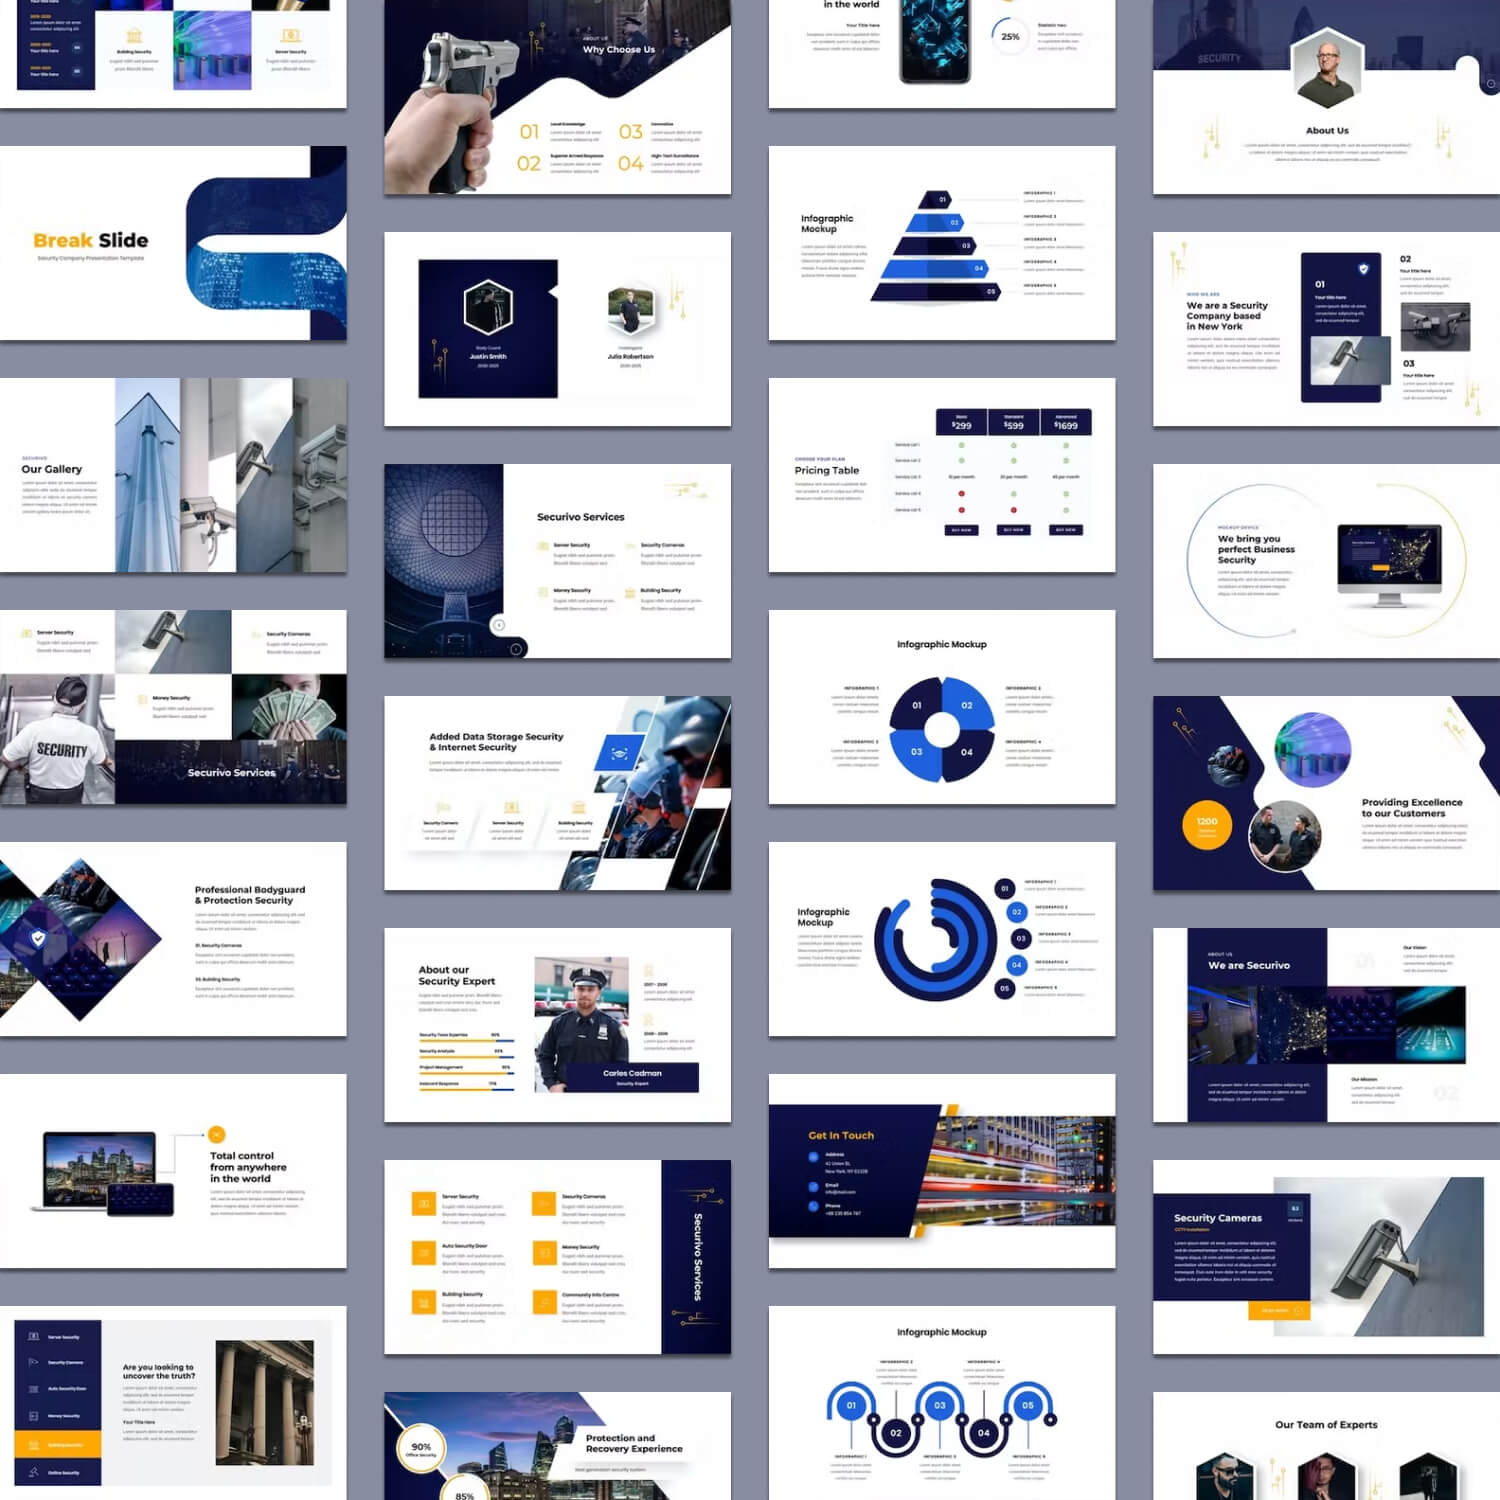 Lots of powerpoint templates for an occupational safety company on a gray background.